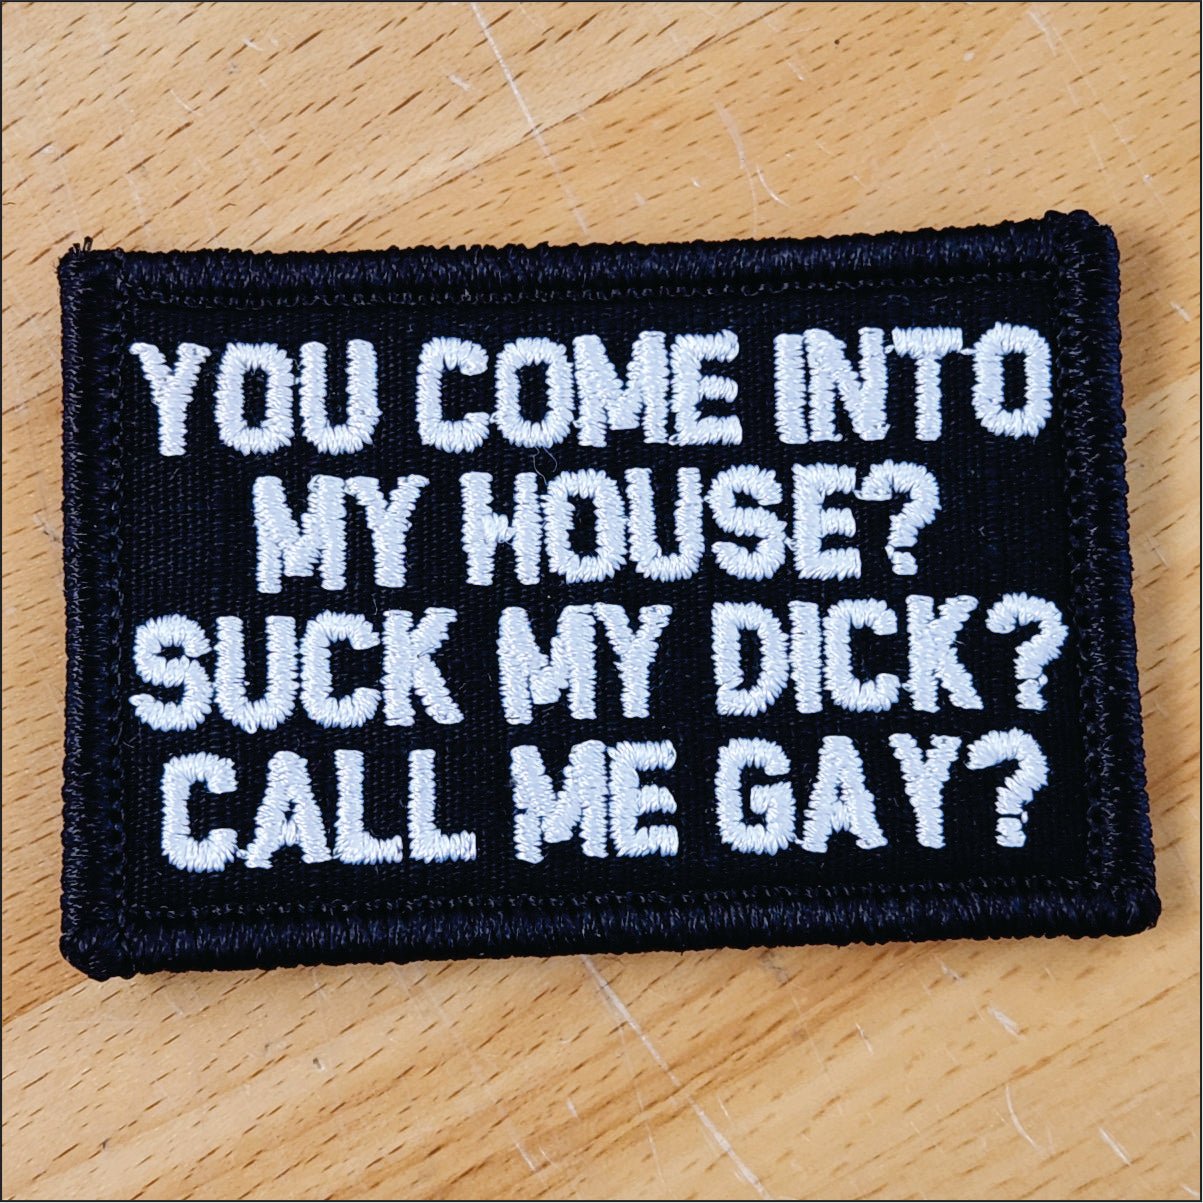 As Seen on Socials - You Come Into My House? Suck My Dick? Call Me Gay? - 2x3 Patch